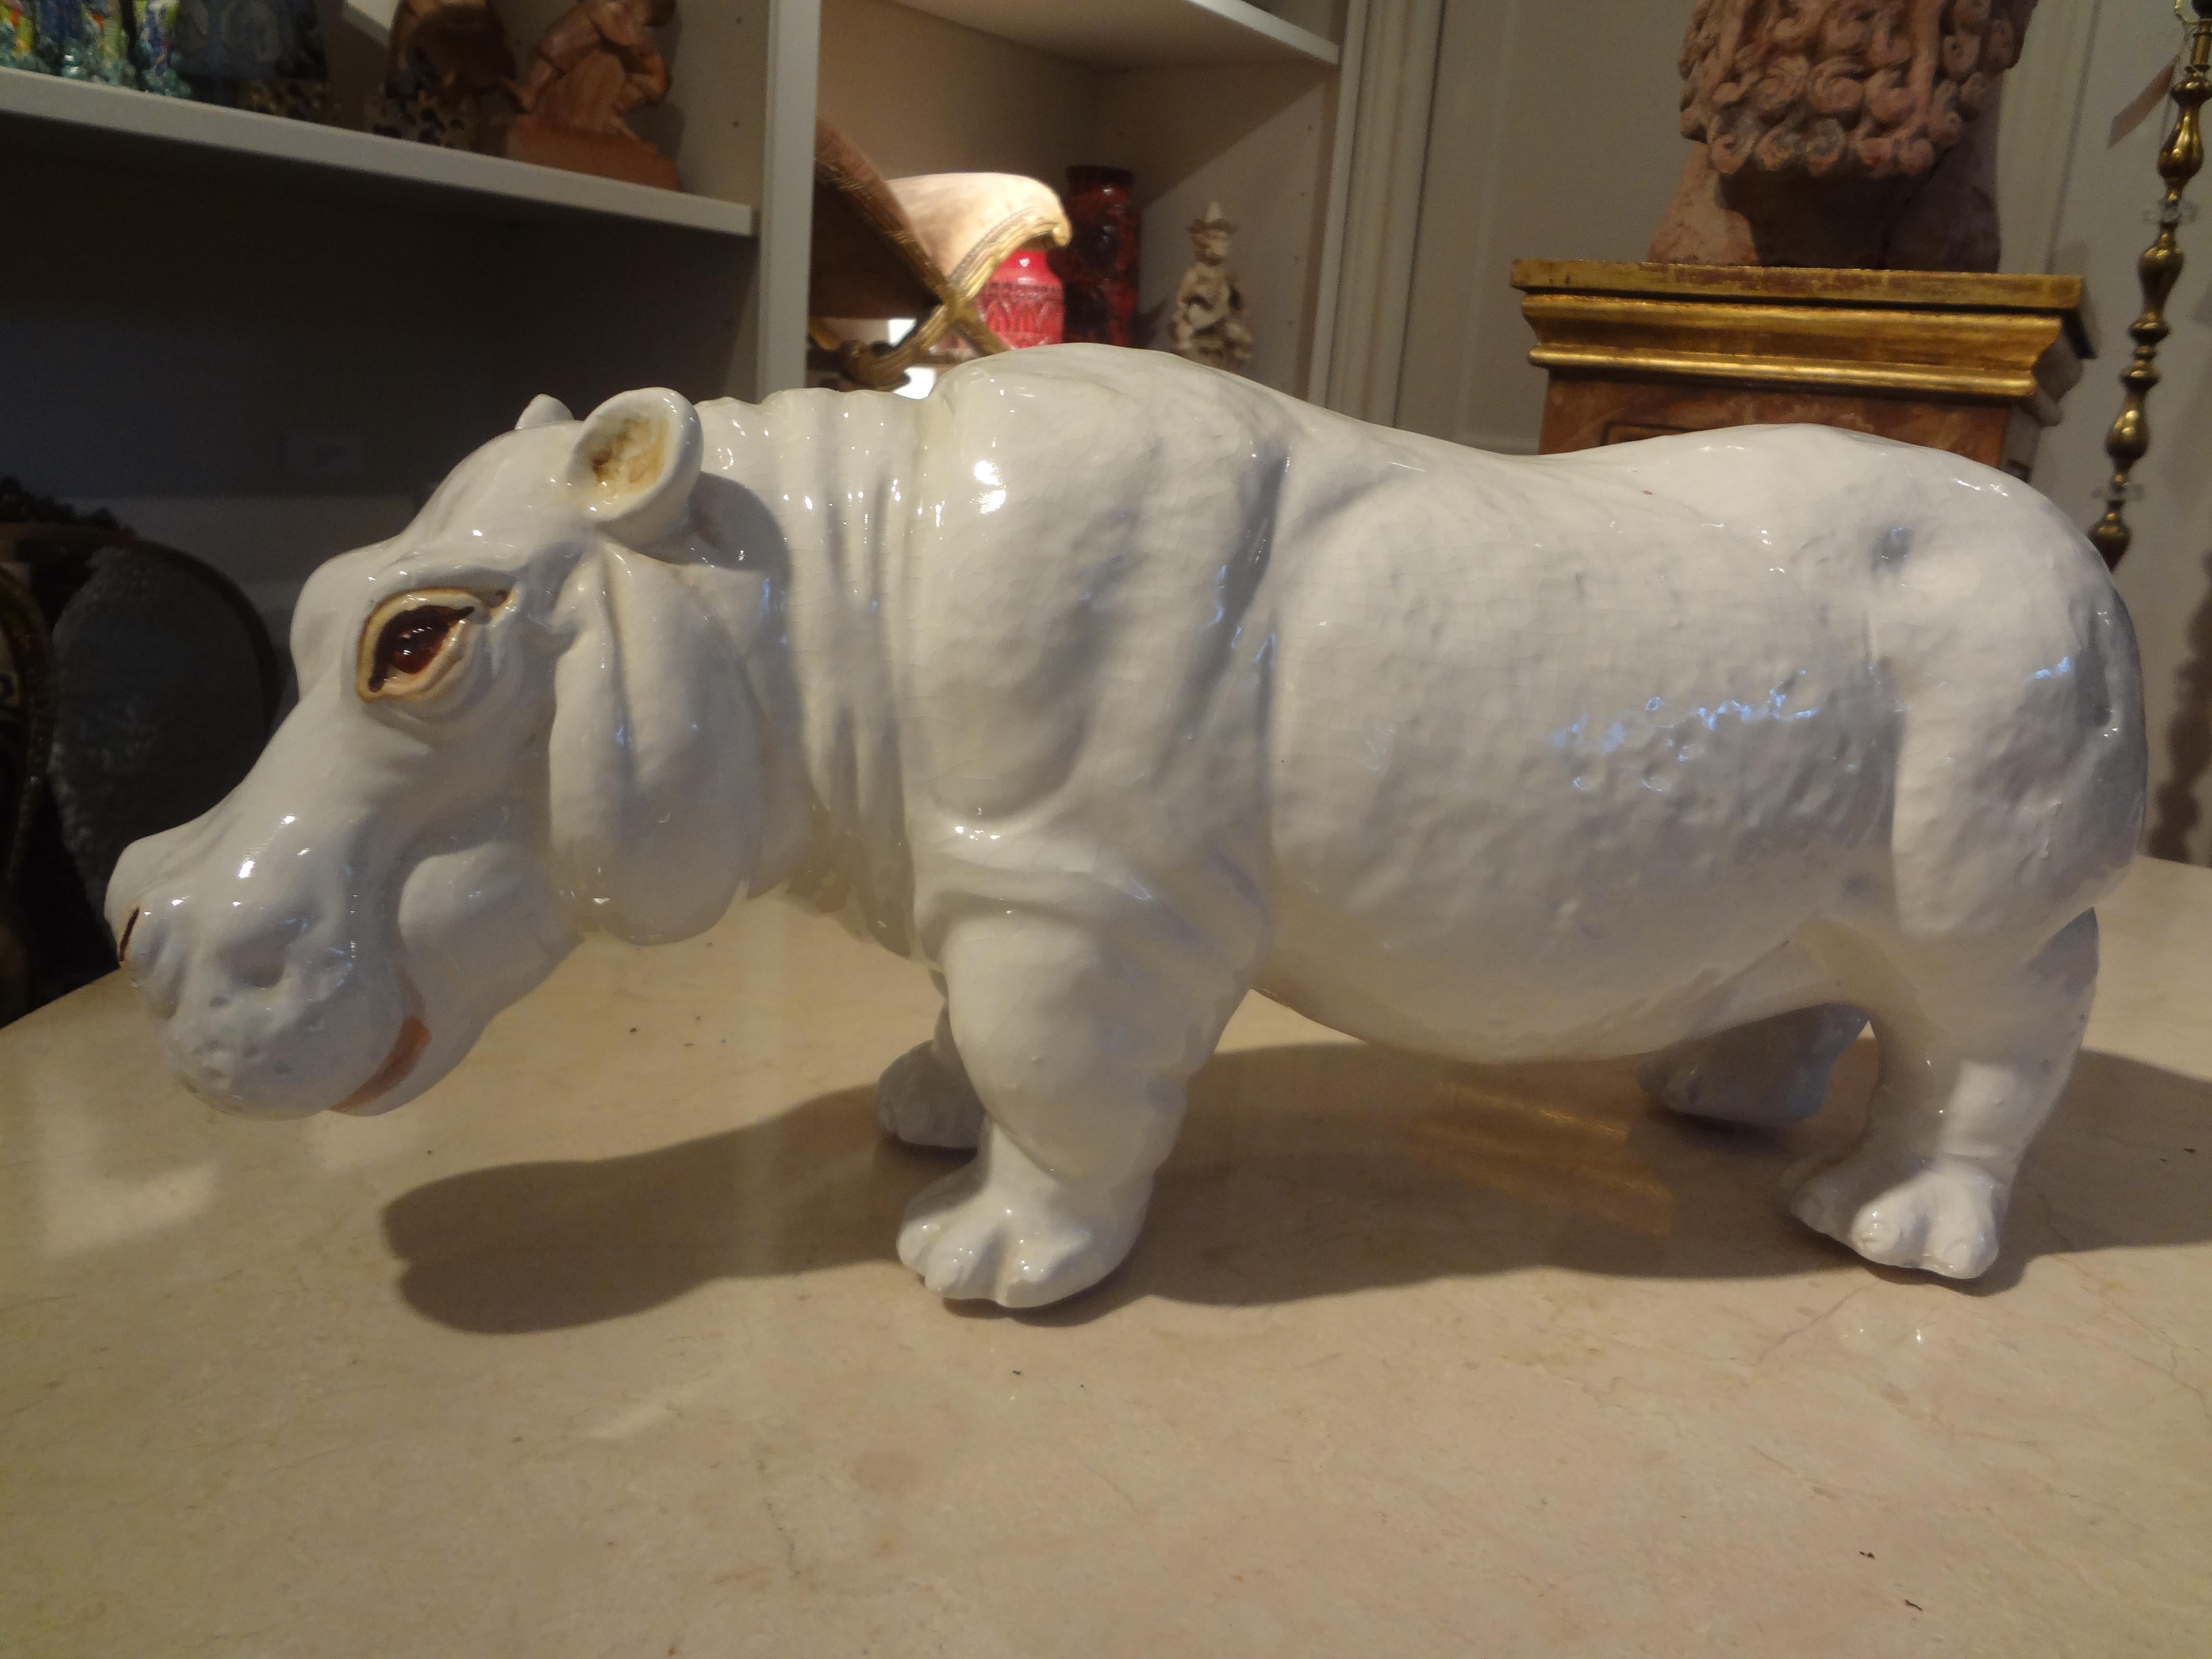 Italian glazed terra cotta Hippopotamus. This stunning large Italian white glazed terracotta Hippo sculpture, figure or statue is realistic and makes the perfect whimsical accessory!